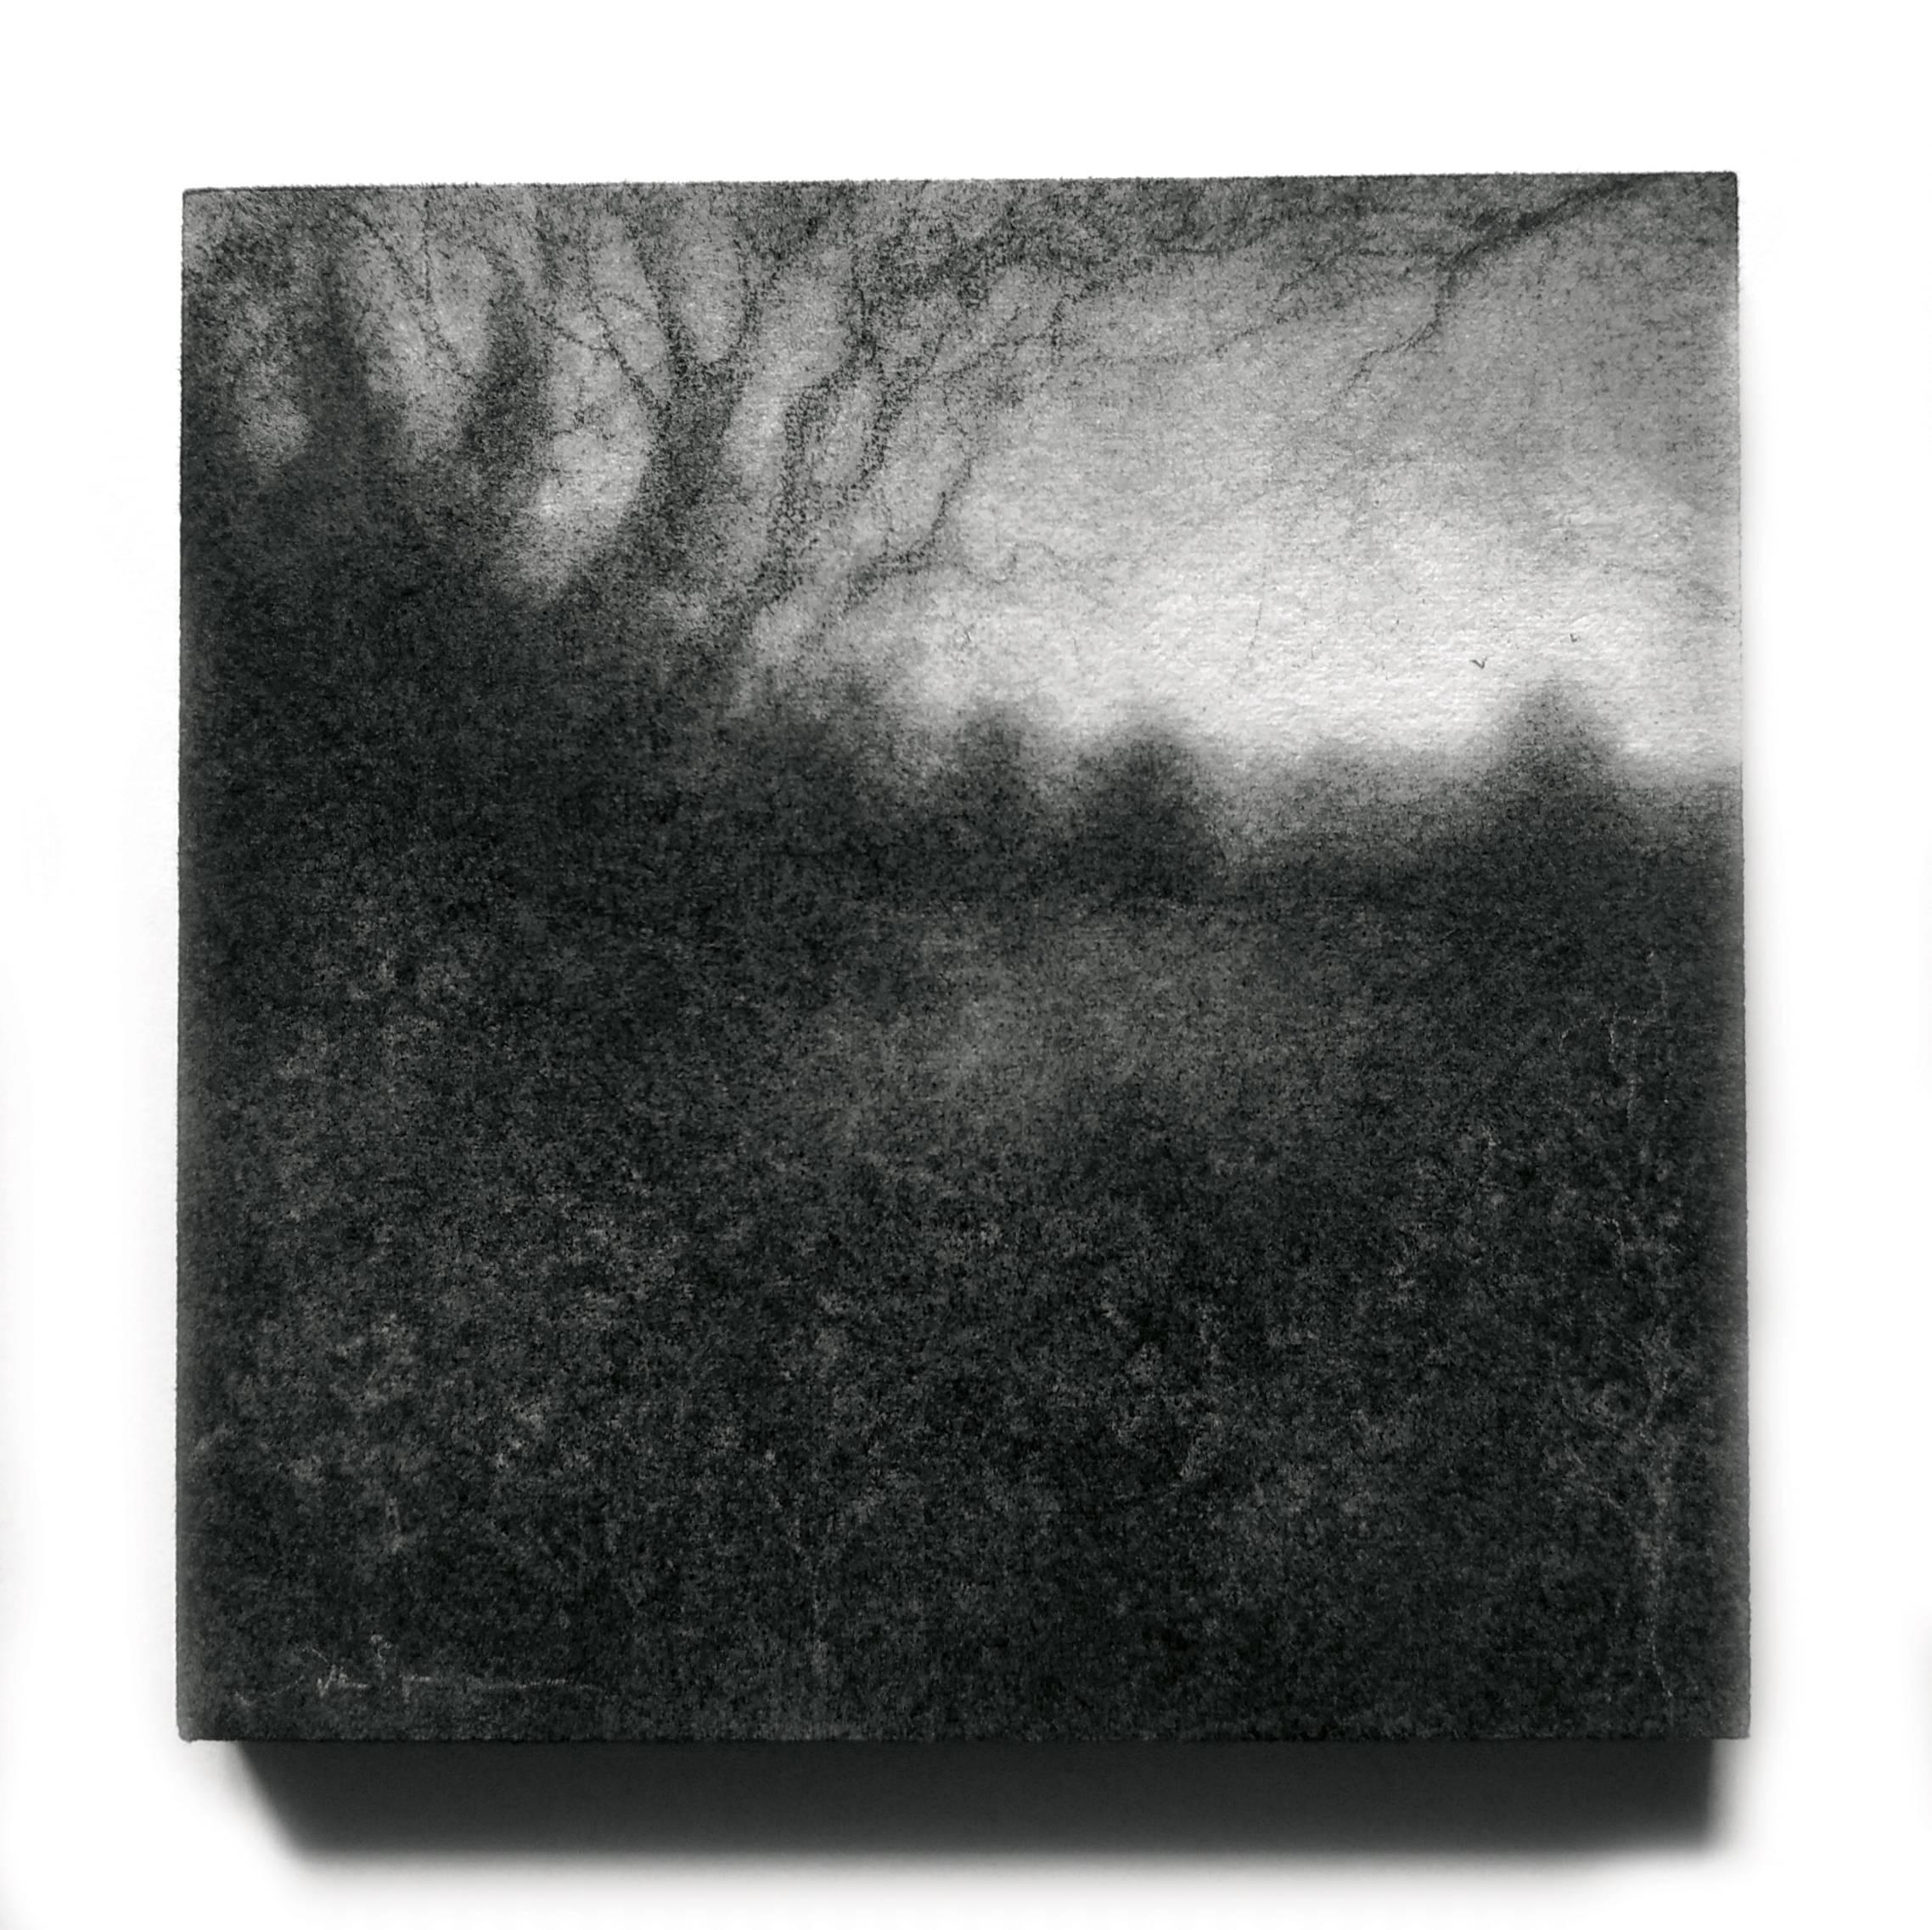 Edgeland XLIX (Modern, Realistic Square Landscape Drawing of Forest in Black) - Art by Sue Bryan